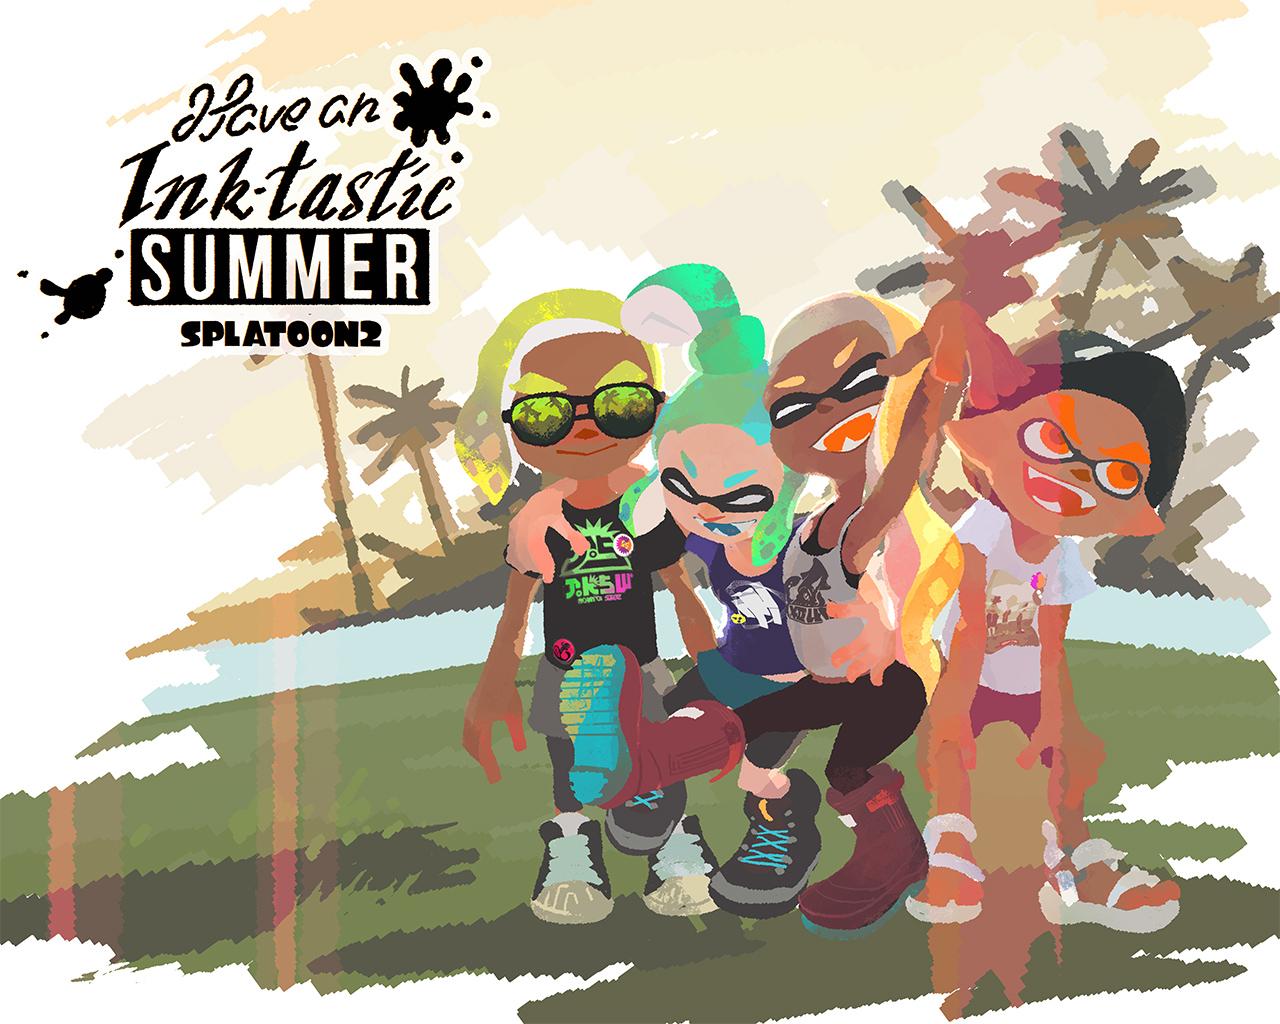 Here's A Splatoon 2 Summer Wallpaper For Your PC And Smartphone